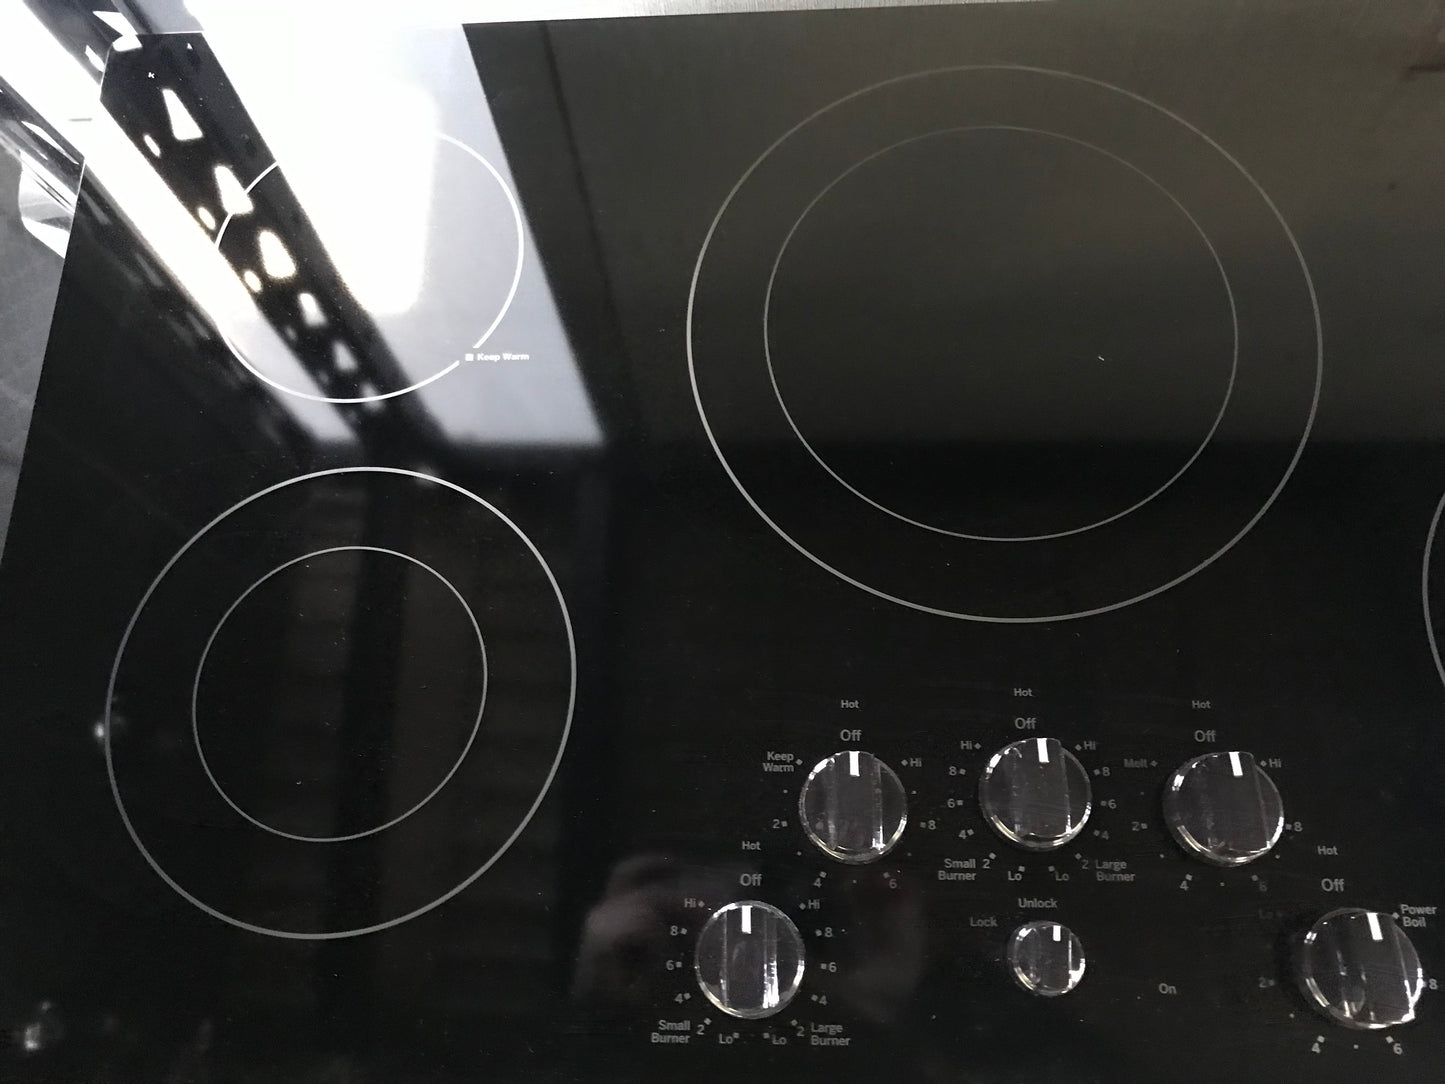 Brand New GE -36" Electric Cooktop - Black stainless steel Model:PP7030BMTS